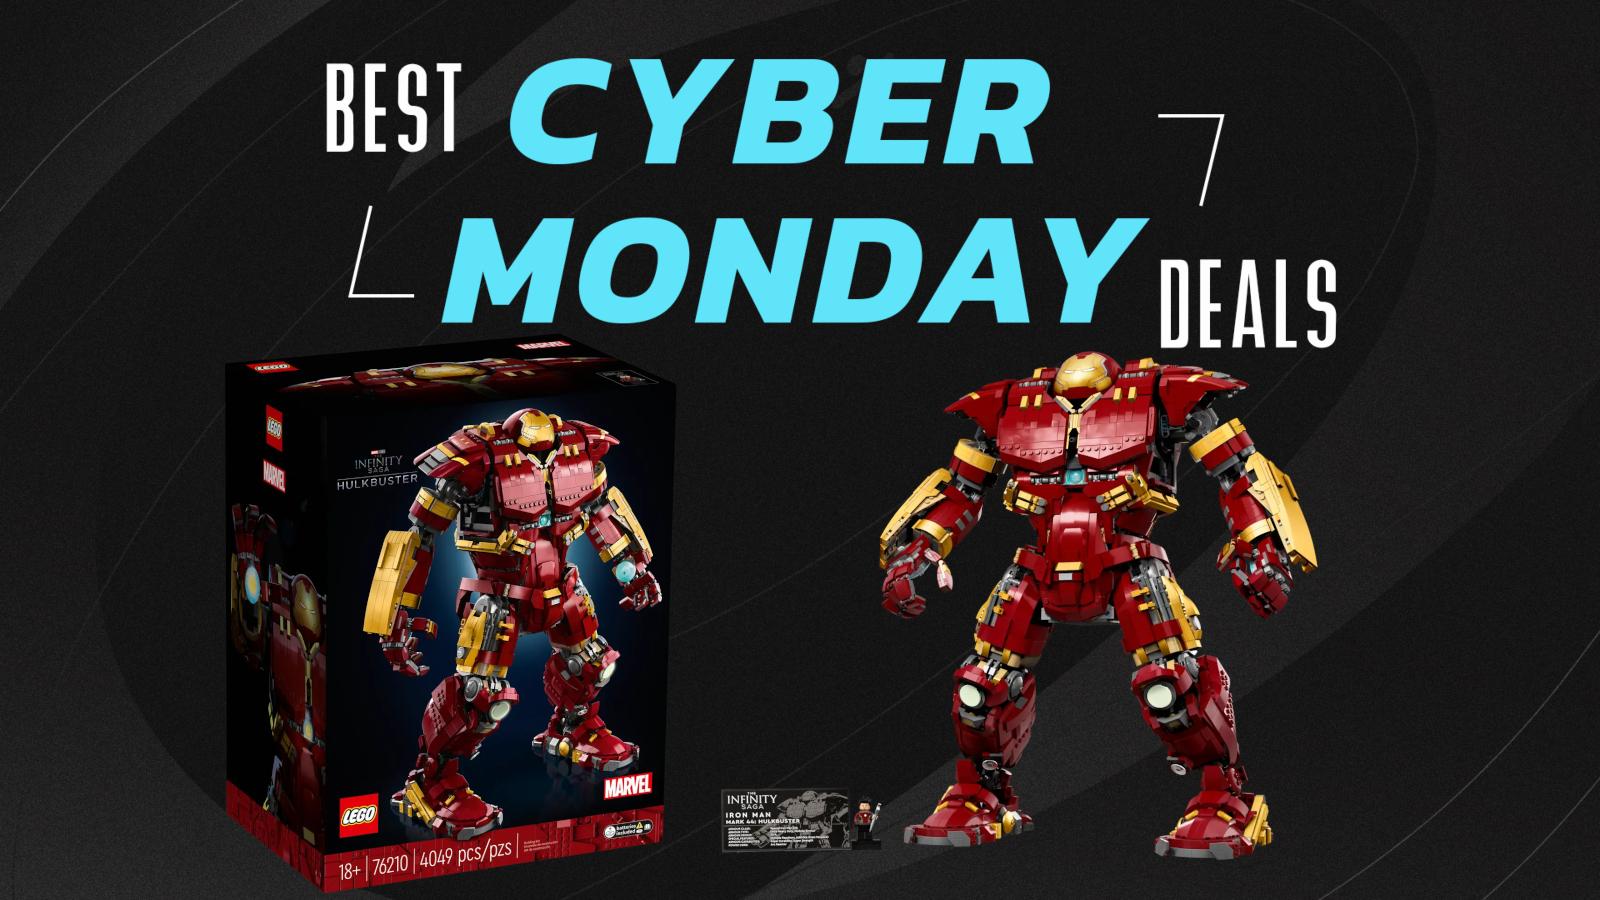 Cyber Monday LEGO Marvel Hulkbuster Deals Cover Image